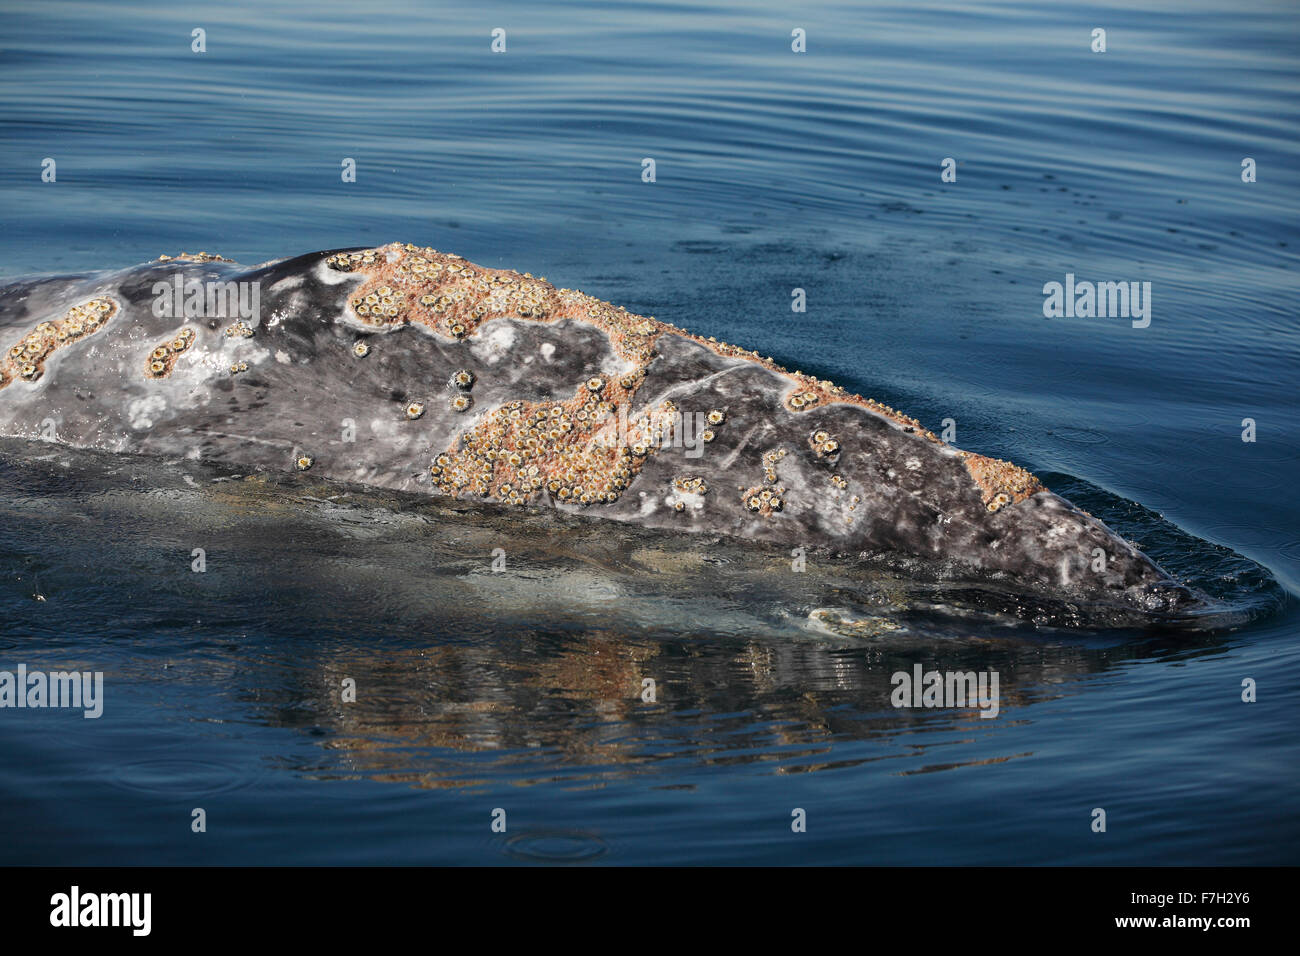 pr5018-D. Gray Whale (Eschrichtius robustus). Head is covered with barnacles (Cryptolepas rhachianecti) and cyamid whale lice. Stock Photo